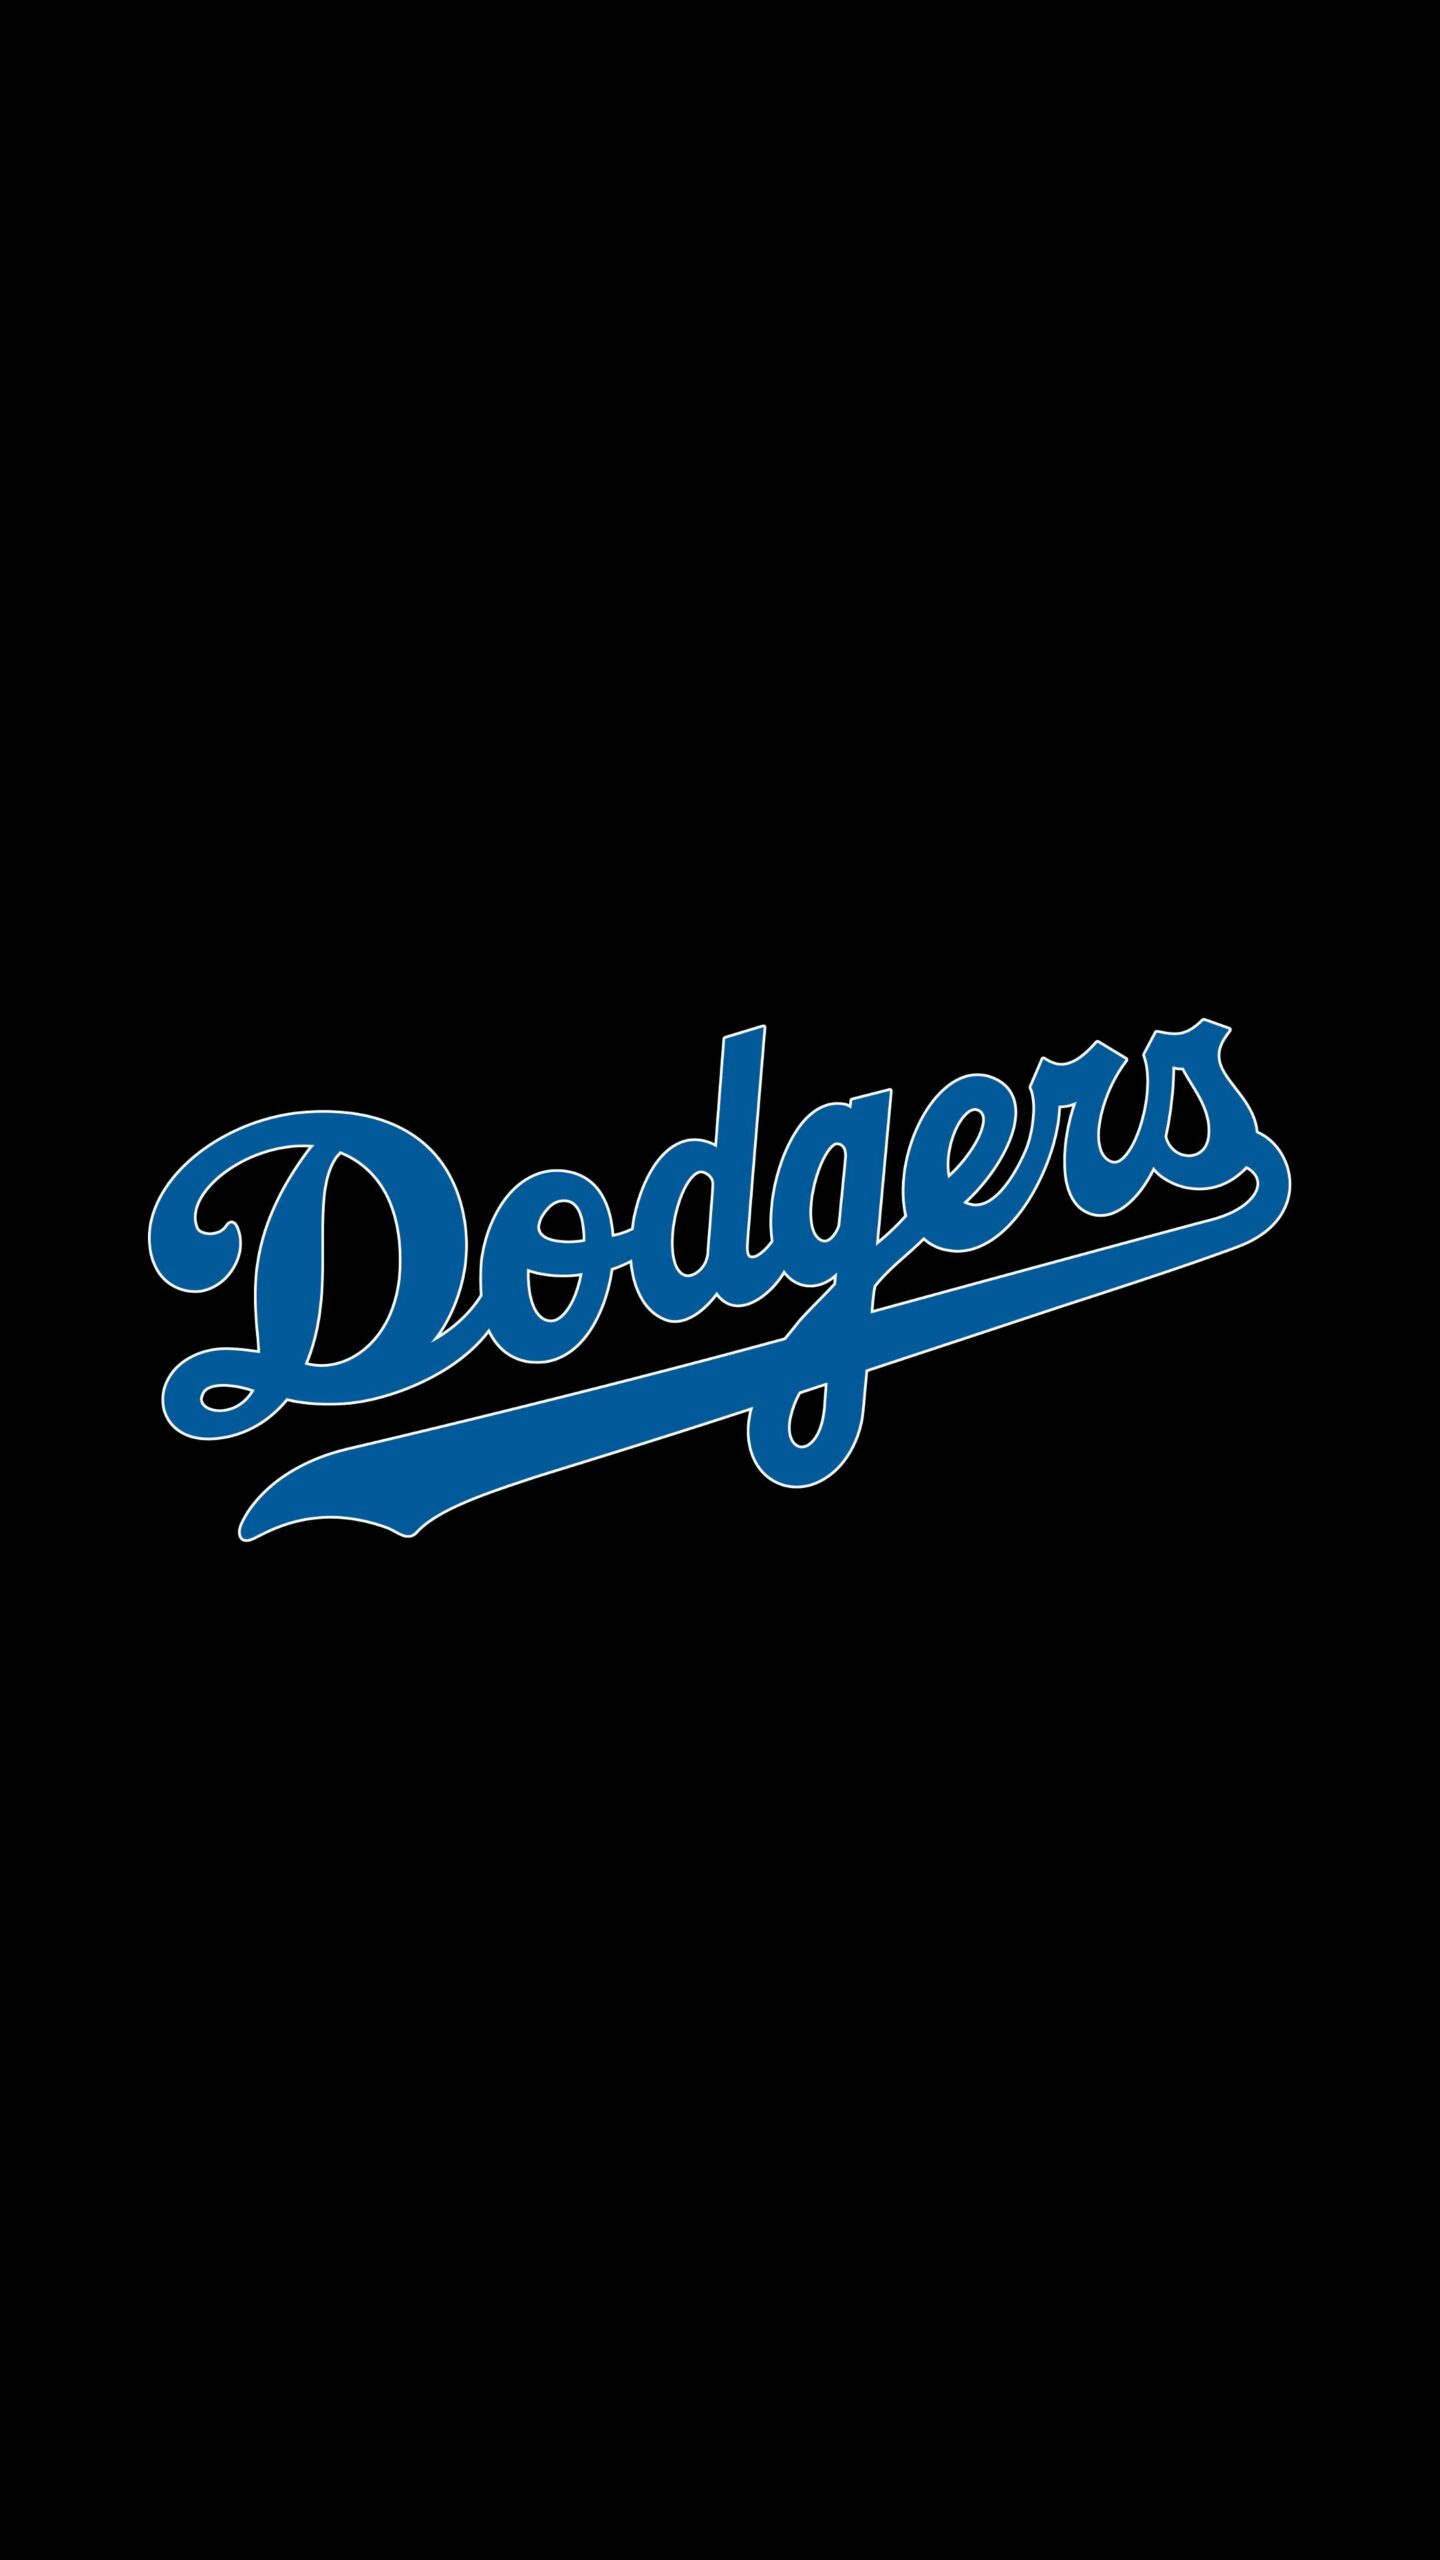 minimal dodger iPhone wallpaper I made! The time and date fit perfectly in  the lights rectangle : r/Dodgers